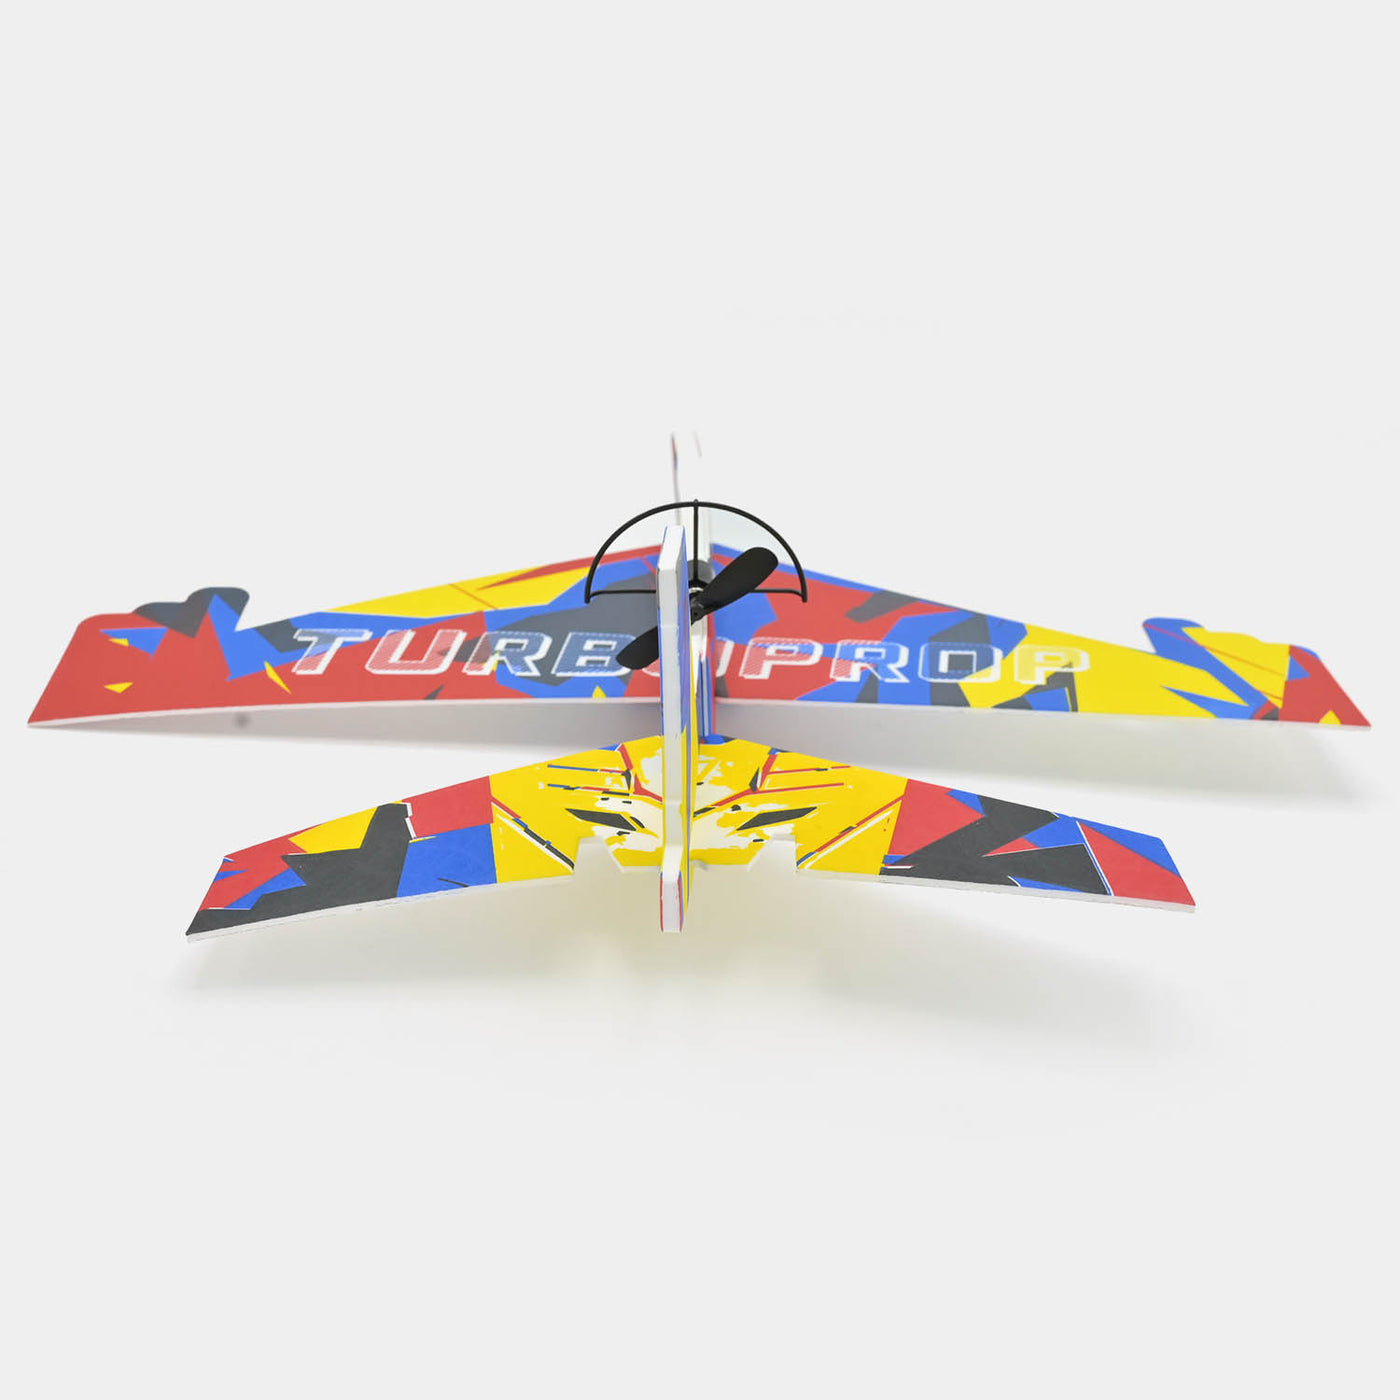 Rechargeable Foamy Glider Aircraft With Lights - Multi